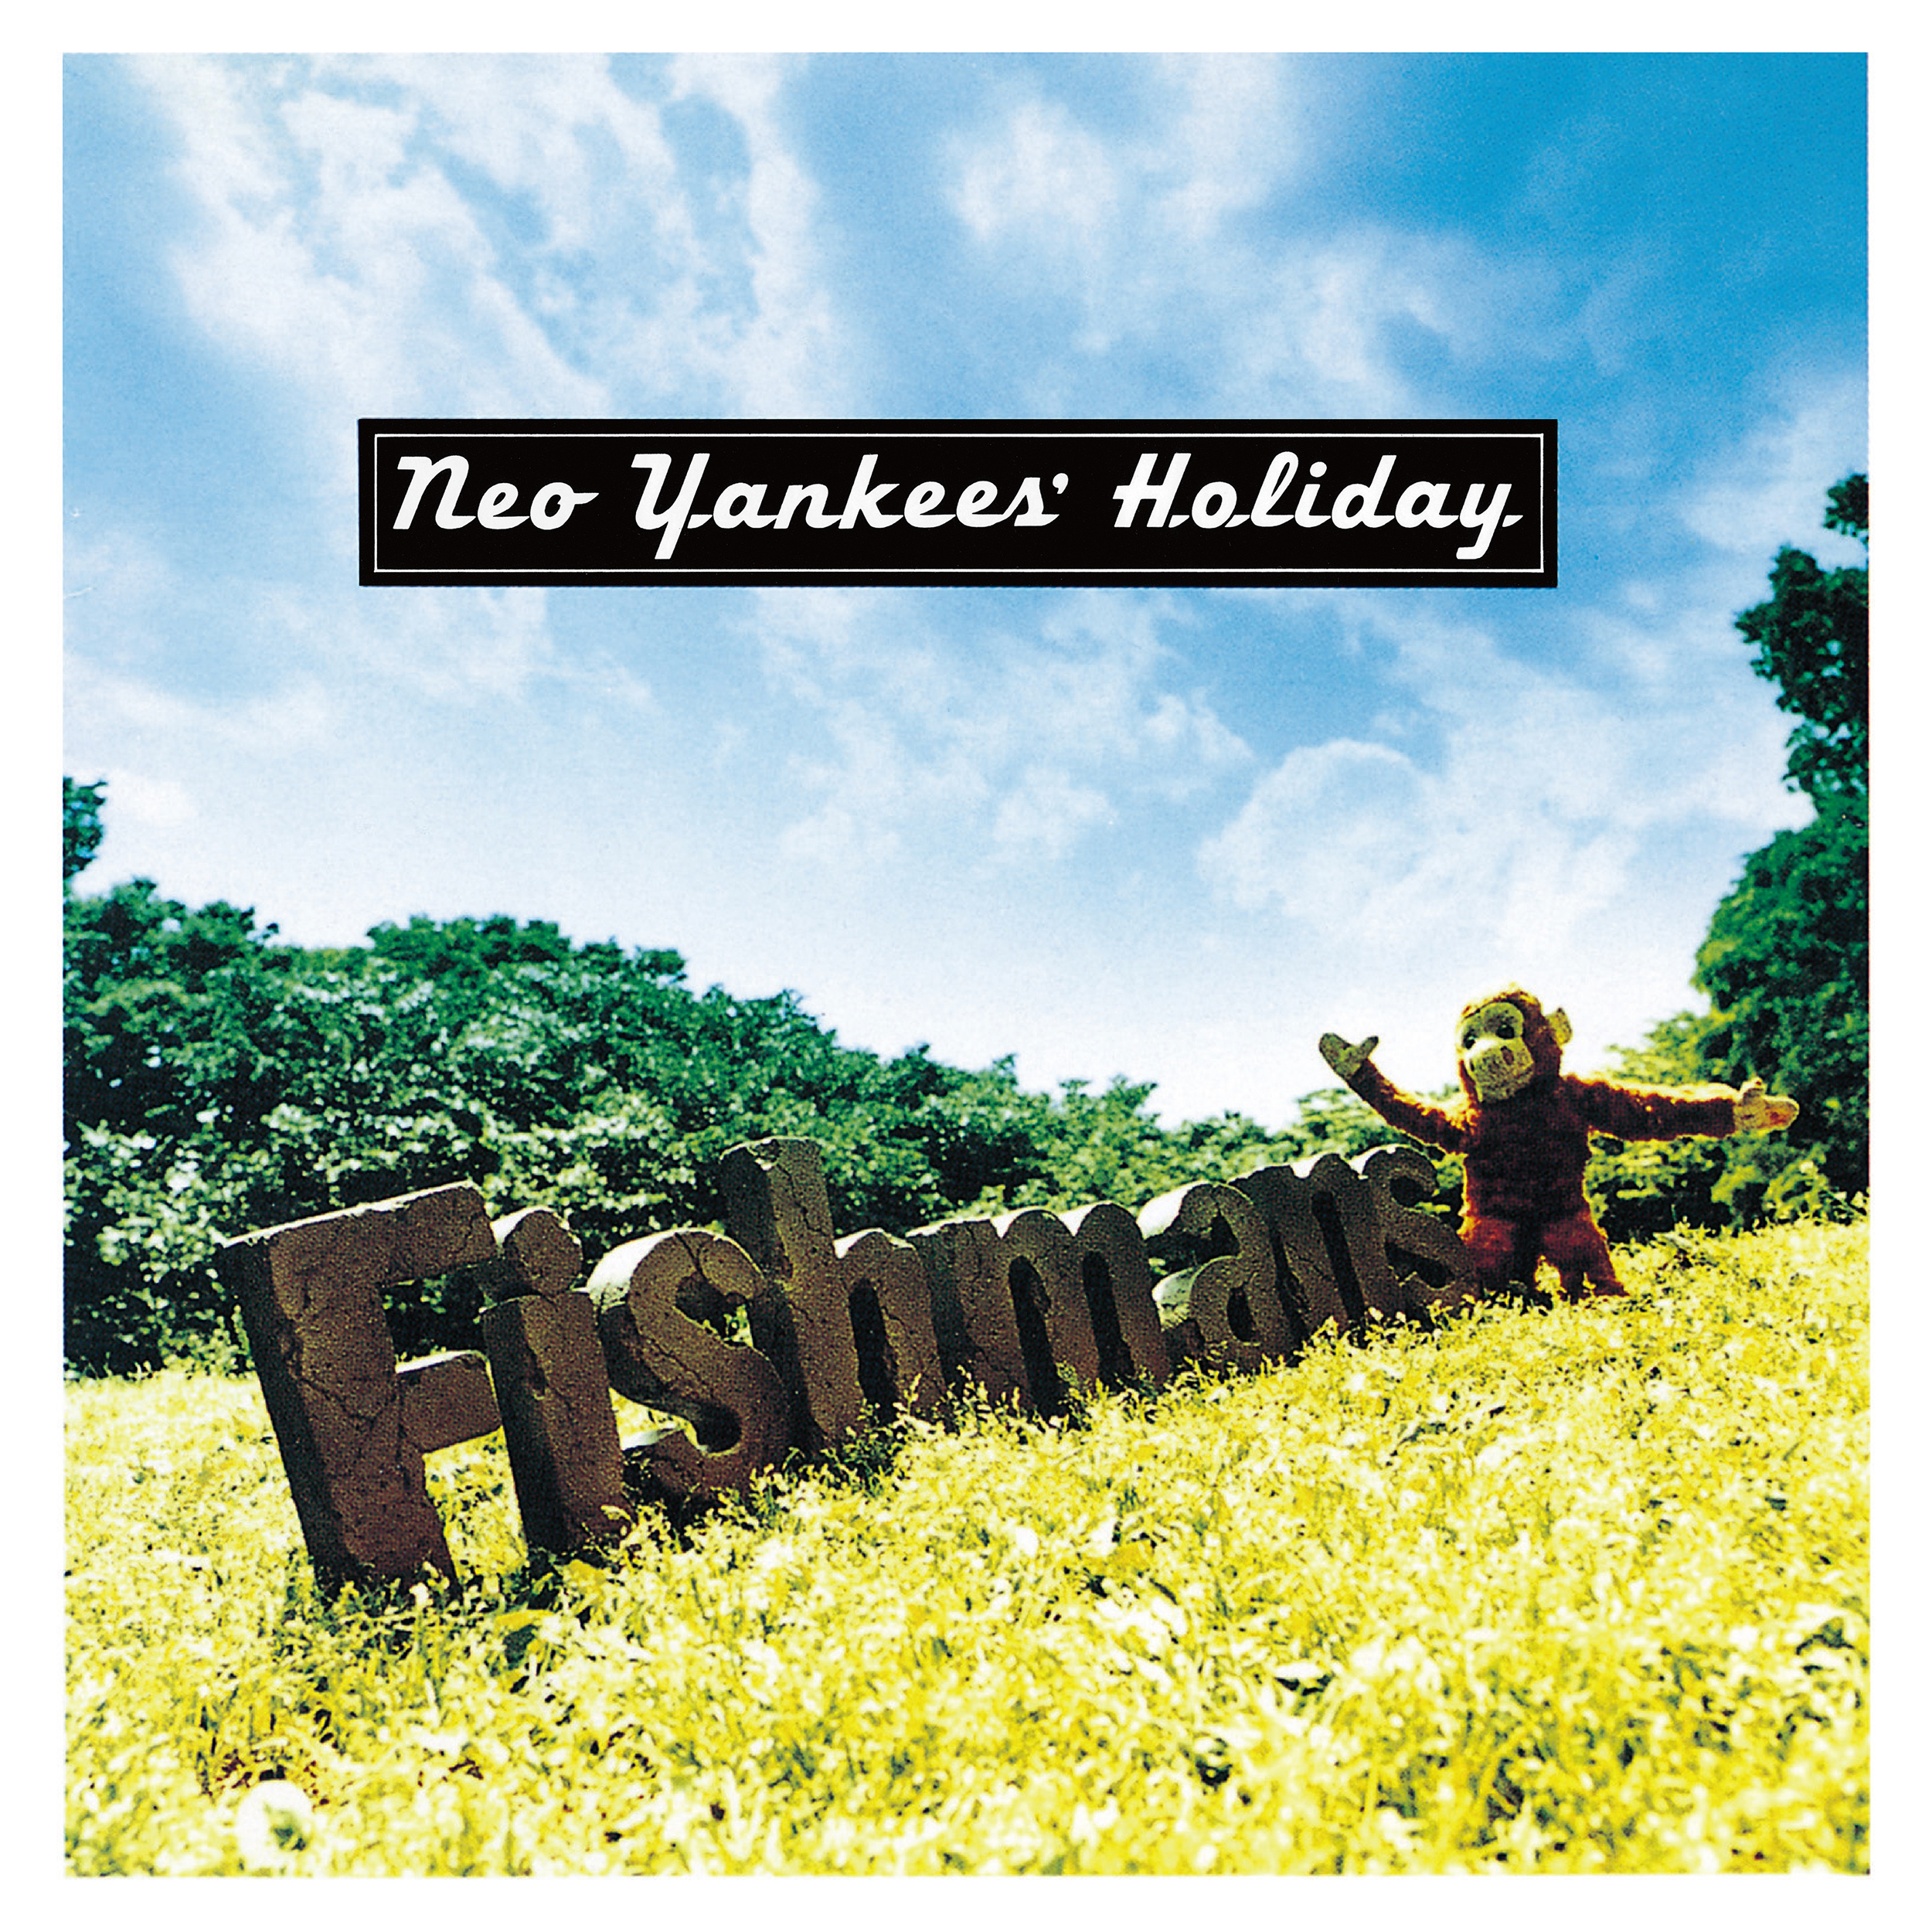 Fishmans "Neo Yankees’ Holiday" LP record (180g heavyweight vinyl) 2-disc set Release on Aug4th 2021 No.1